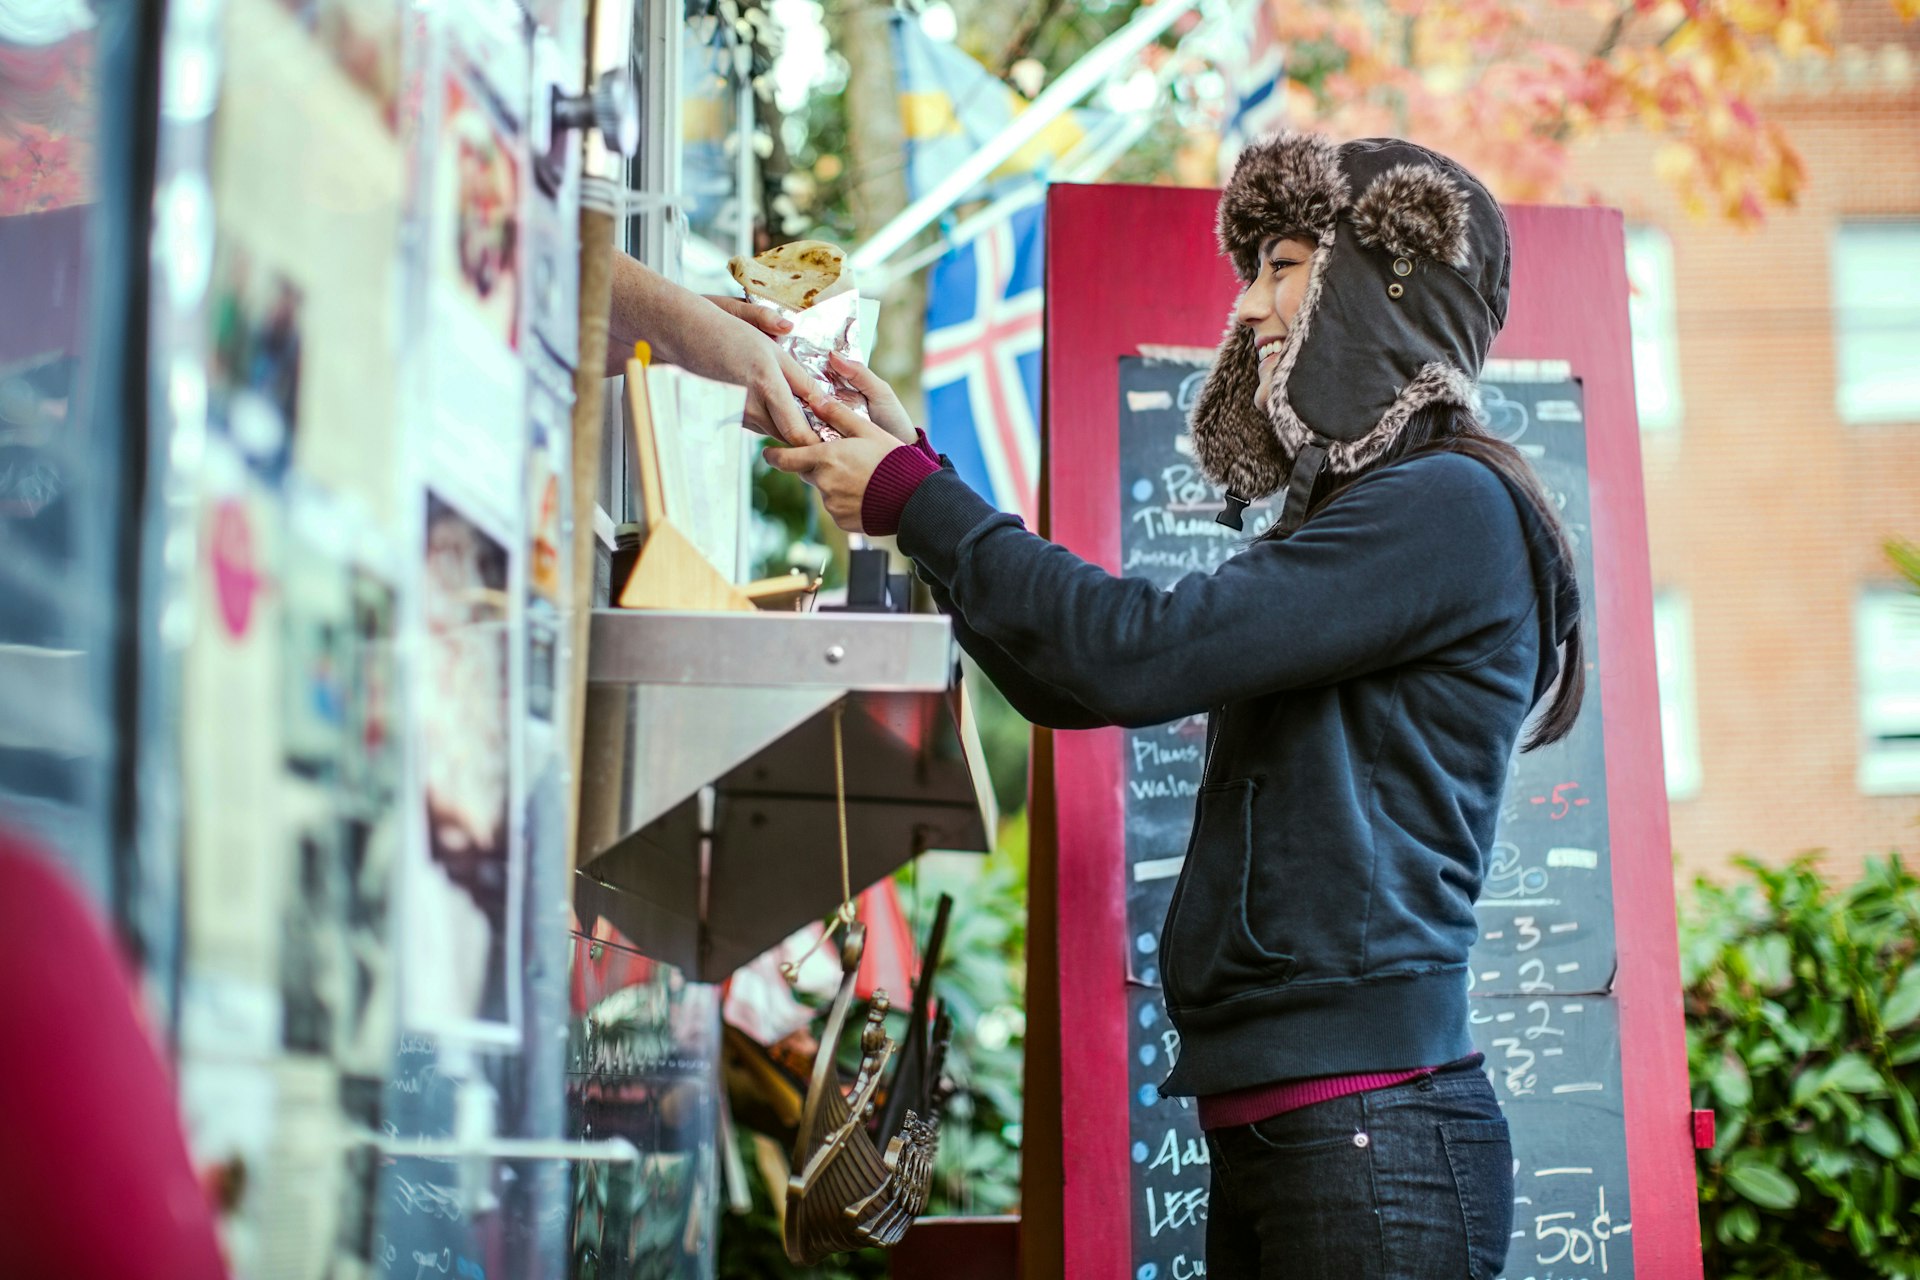 A woman orders a meal at a Portland food truck. Image by RyanJLane / Getty